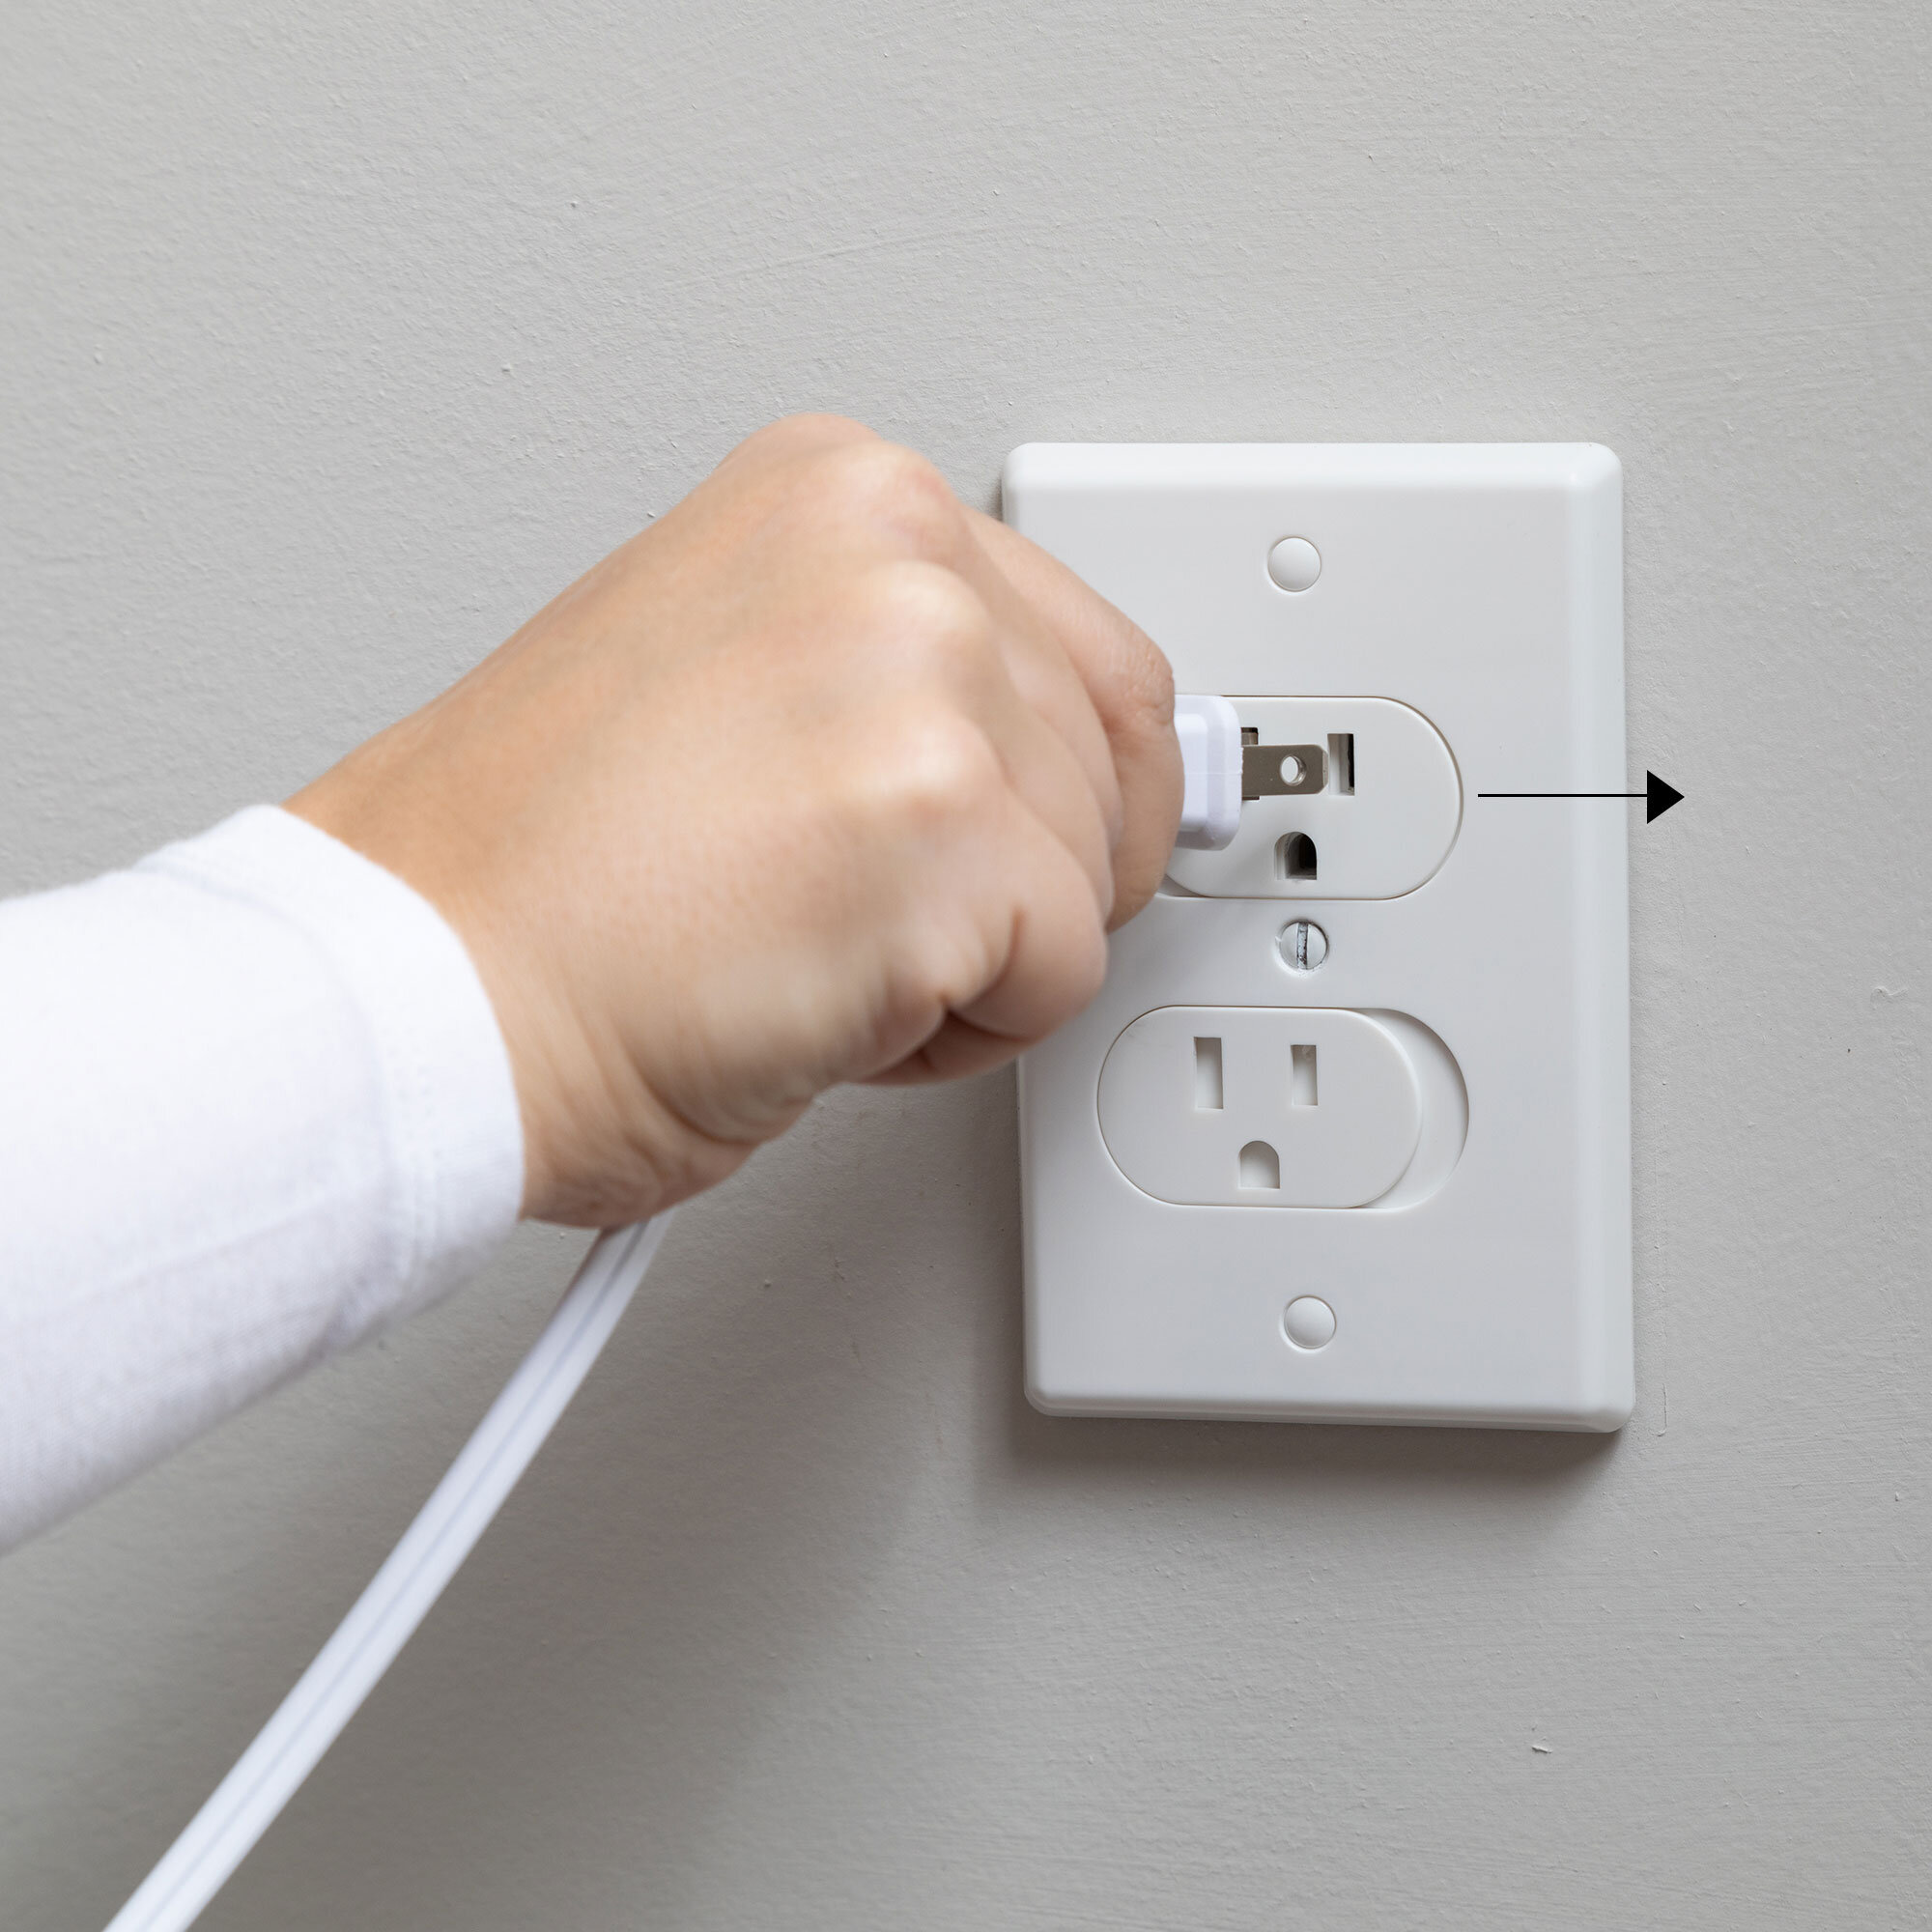 Using the Universal Self-Closing Outlet Cover